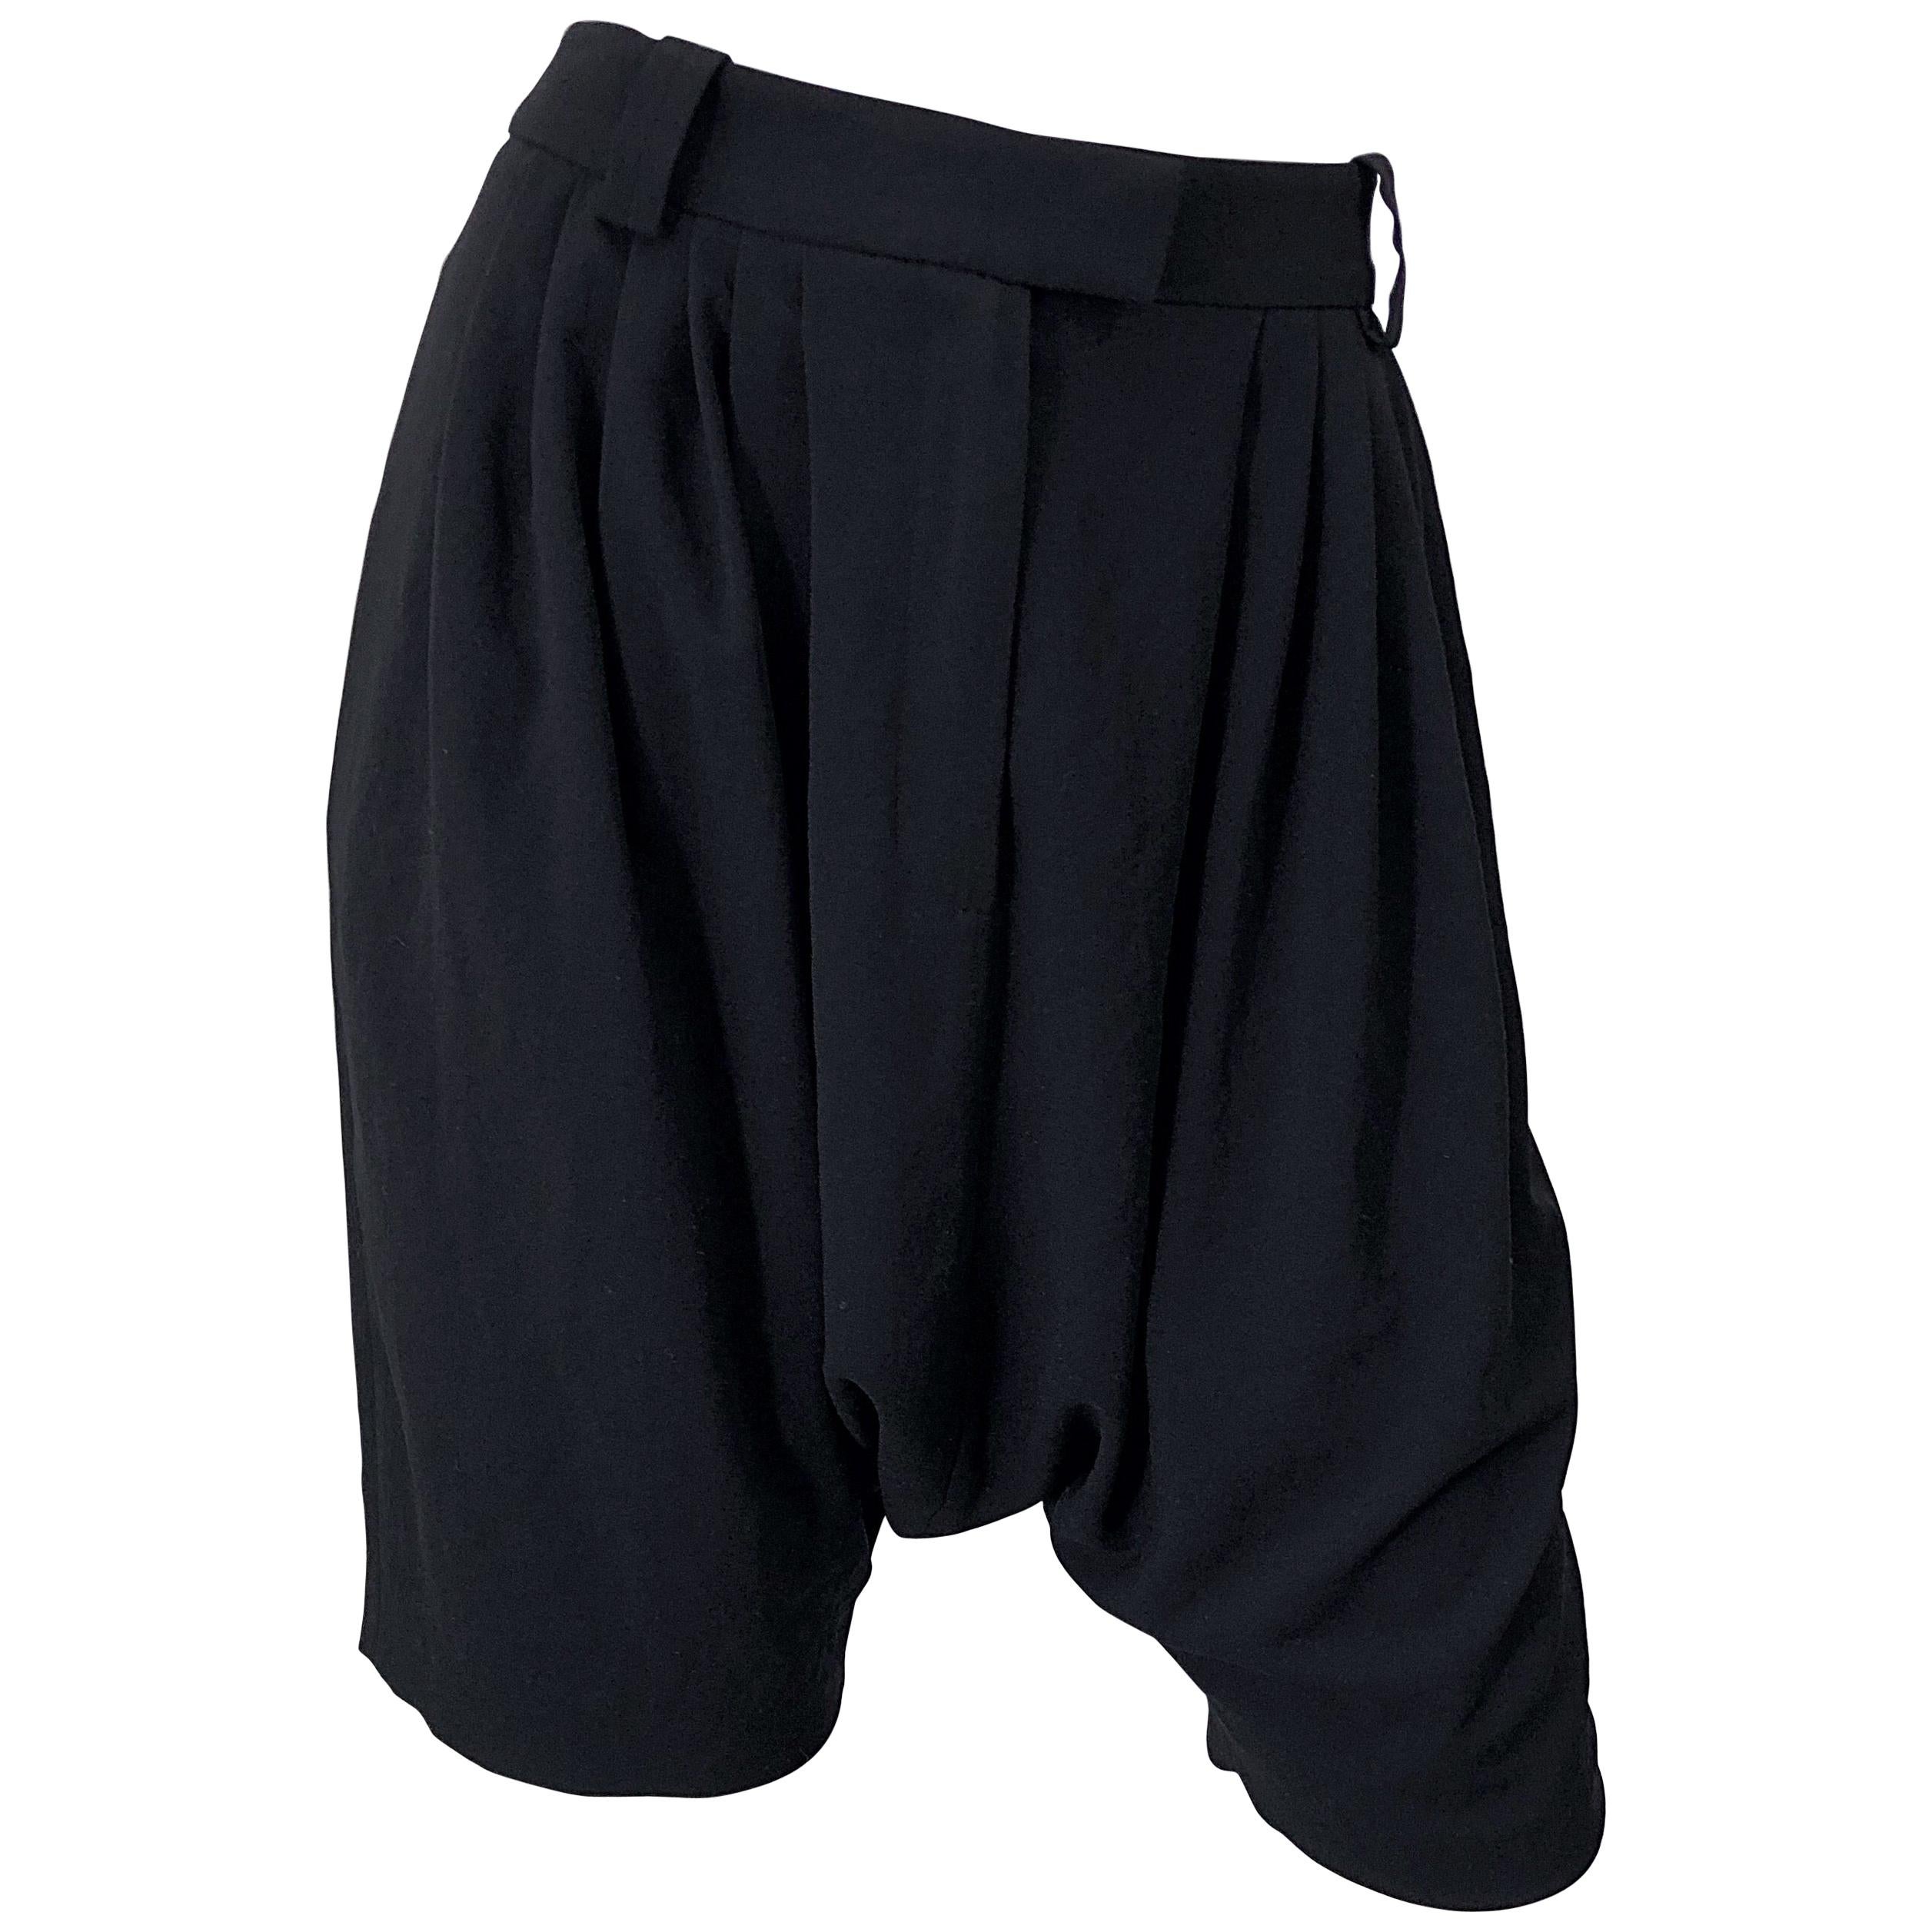 NWT Givenchy by Clare Waight Keller Size 40 / 8 Black Drop Crotch / Waist Shorts For Sale